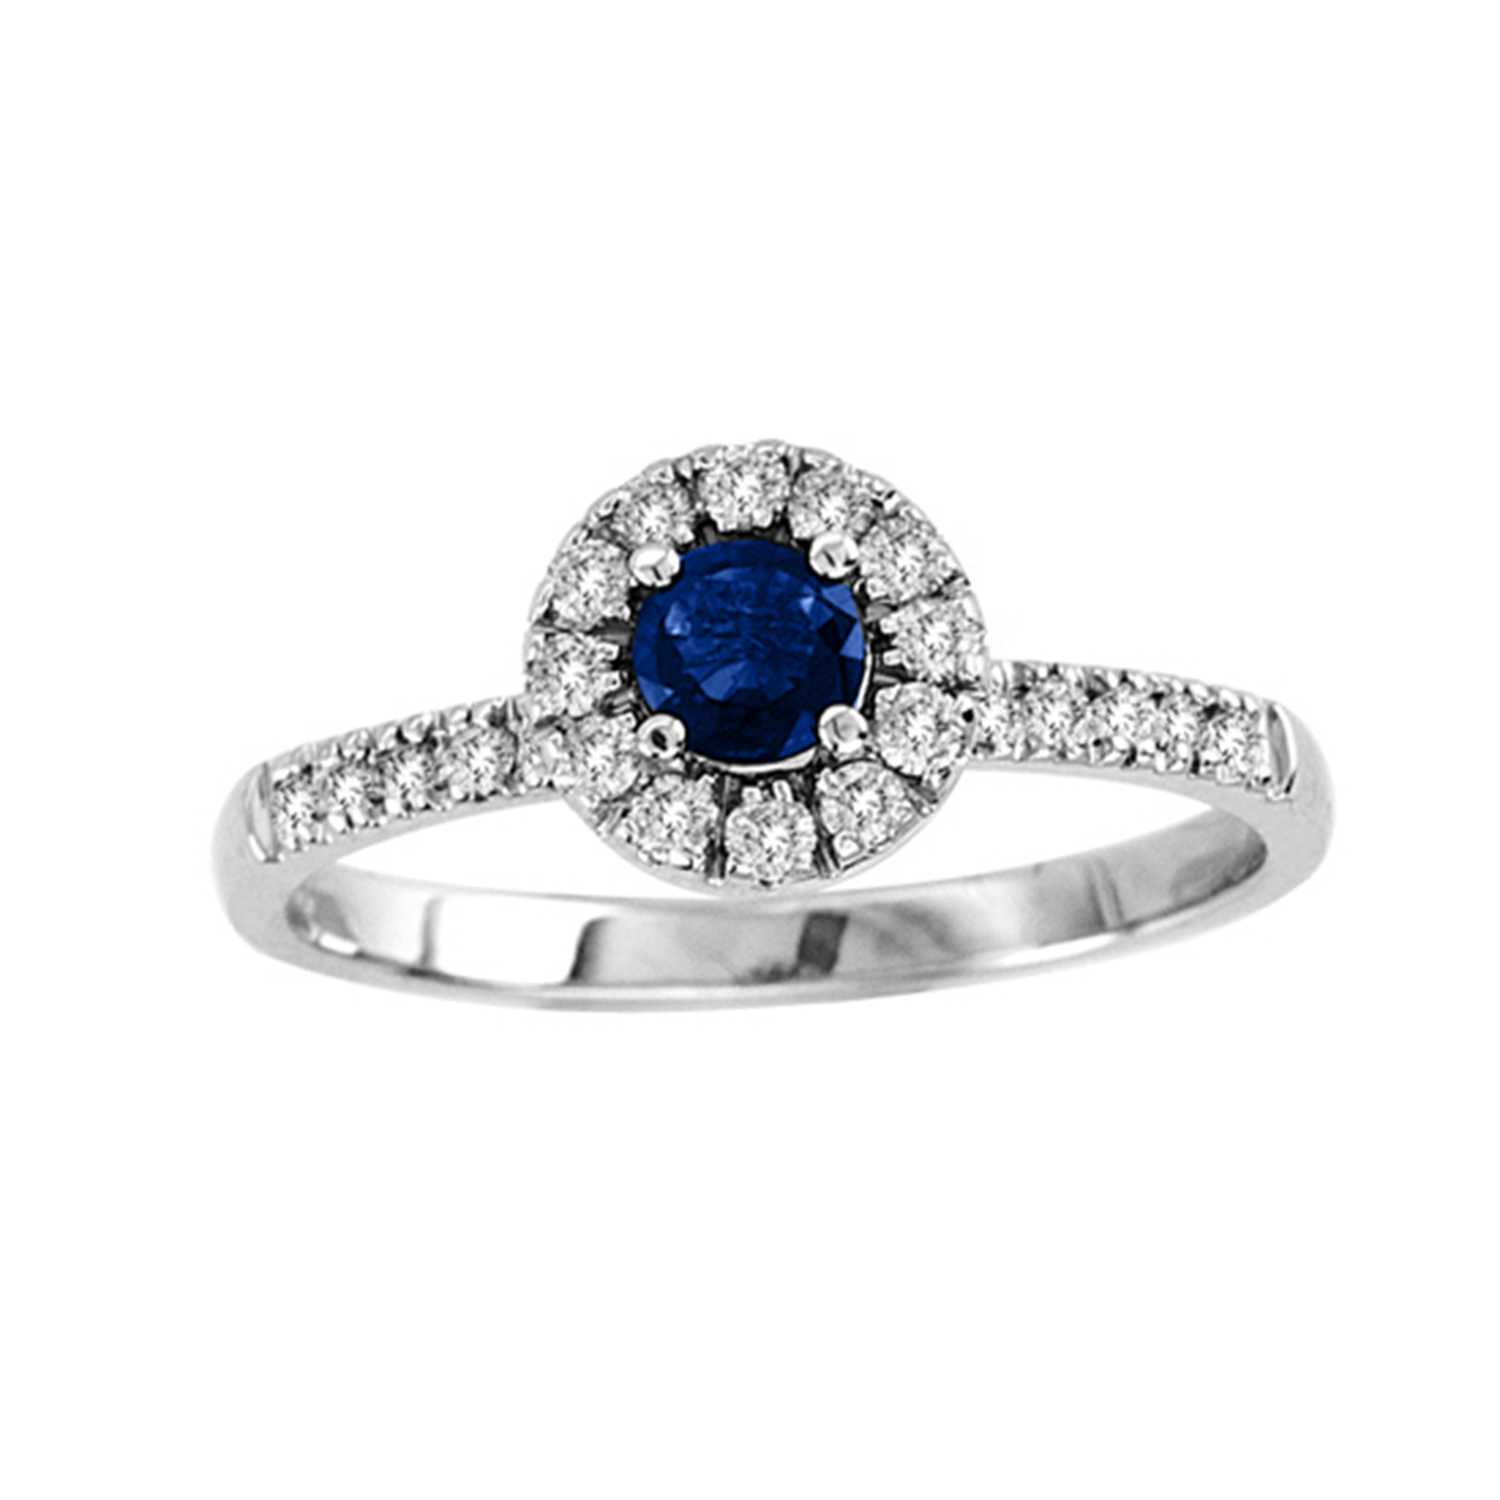 0.60cttw Sapphire and Diamond Halo Ring set in 14k Gold